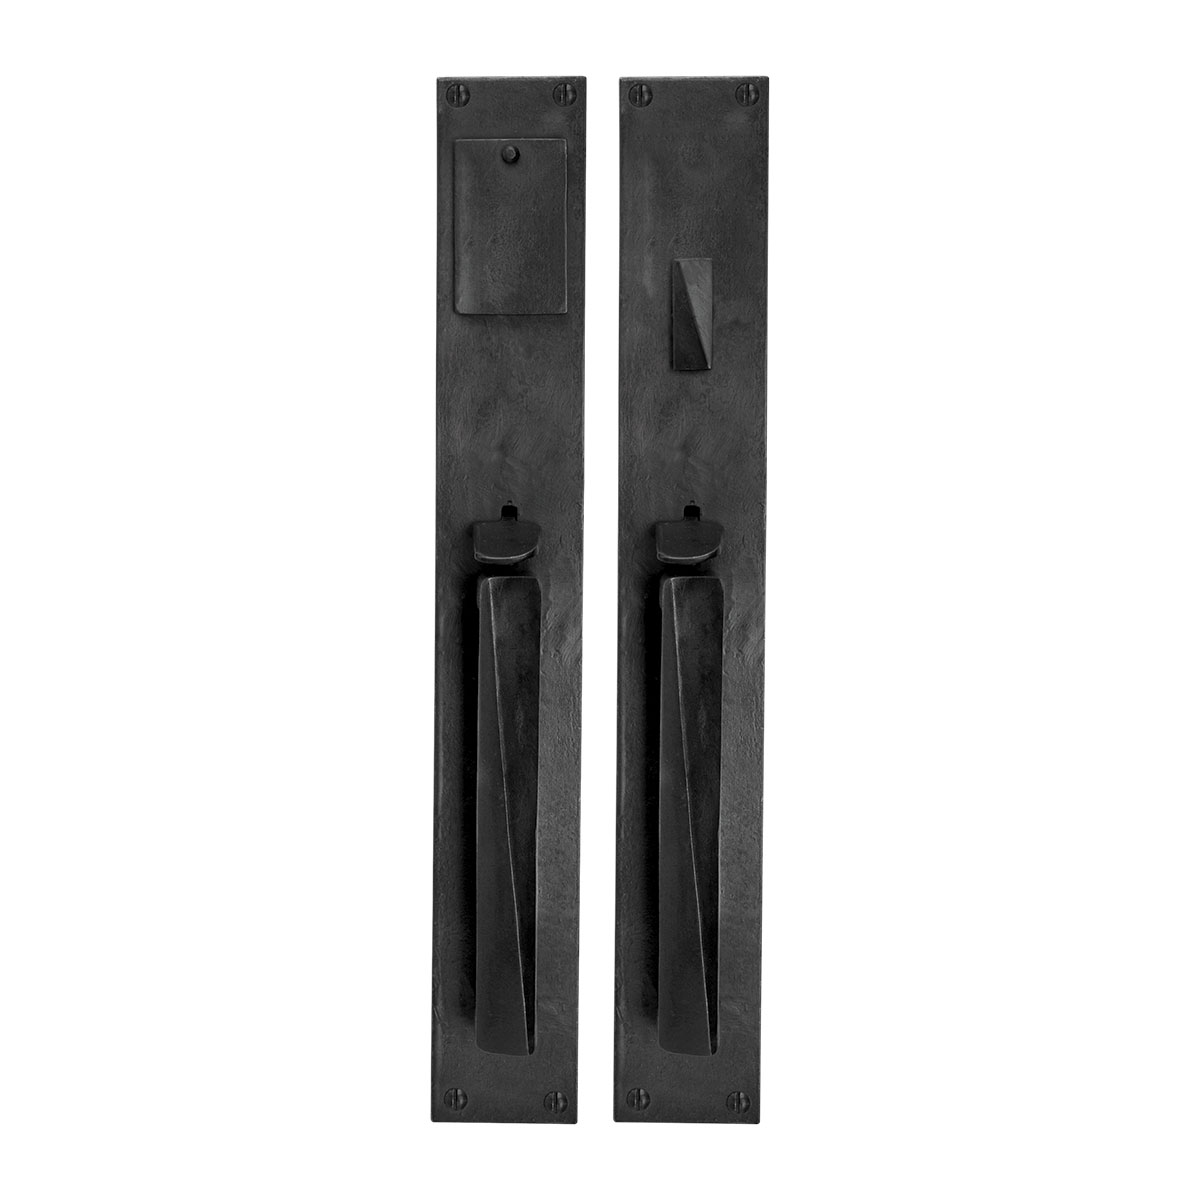 Hand Forged Iron Milan II Thumbtatch Mortise Entry Set